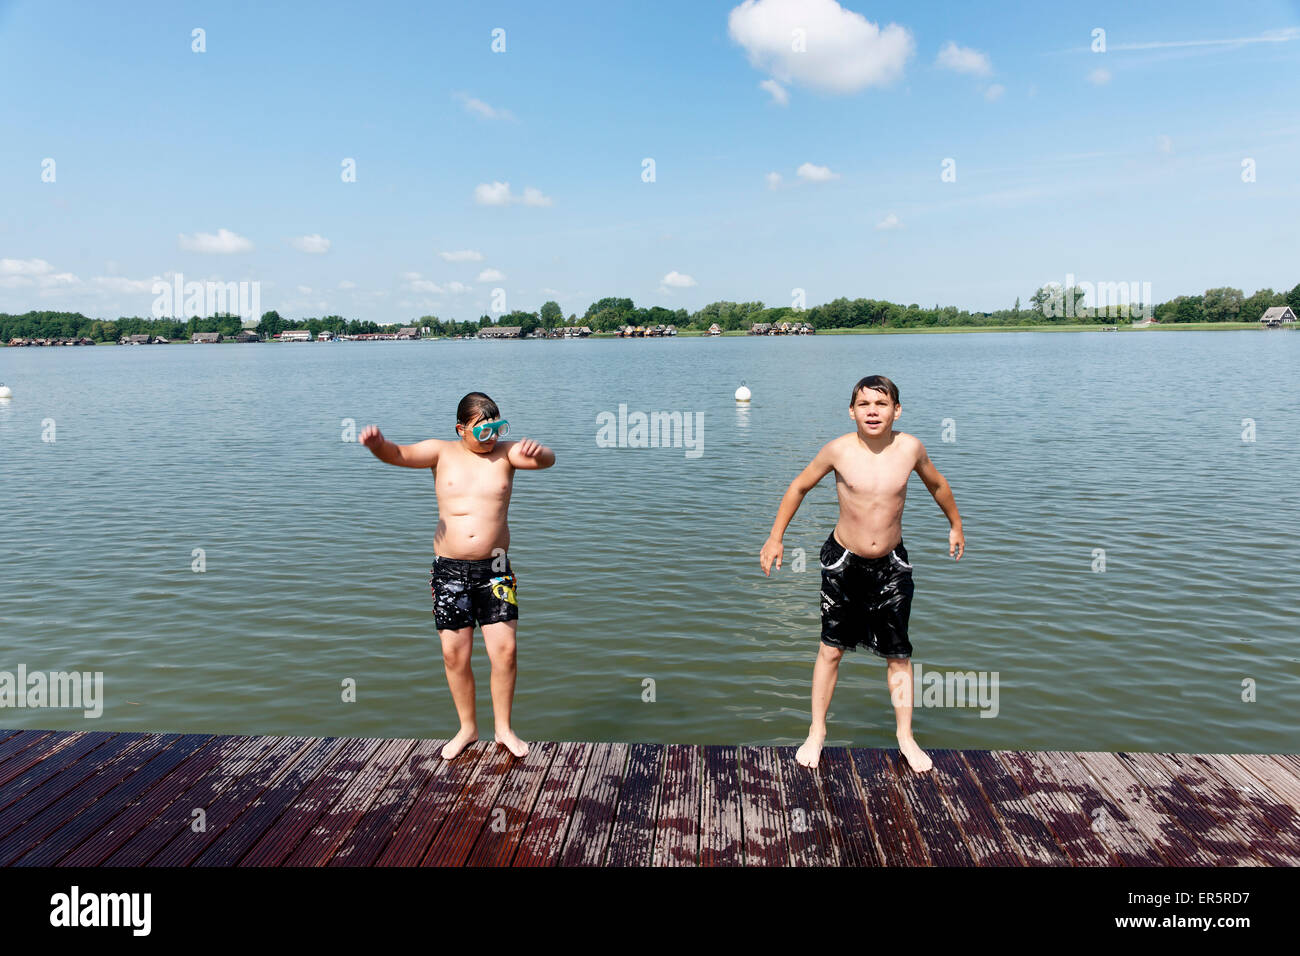 Two boys jumping baclwards into the lake, Inselsee, Guestrow, Mecklenburg-Western Pomerania, Germany Stock Photo